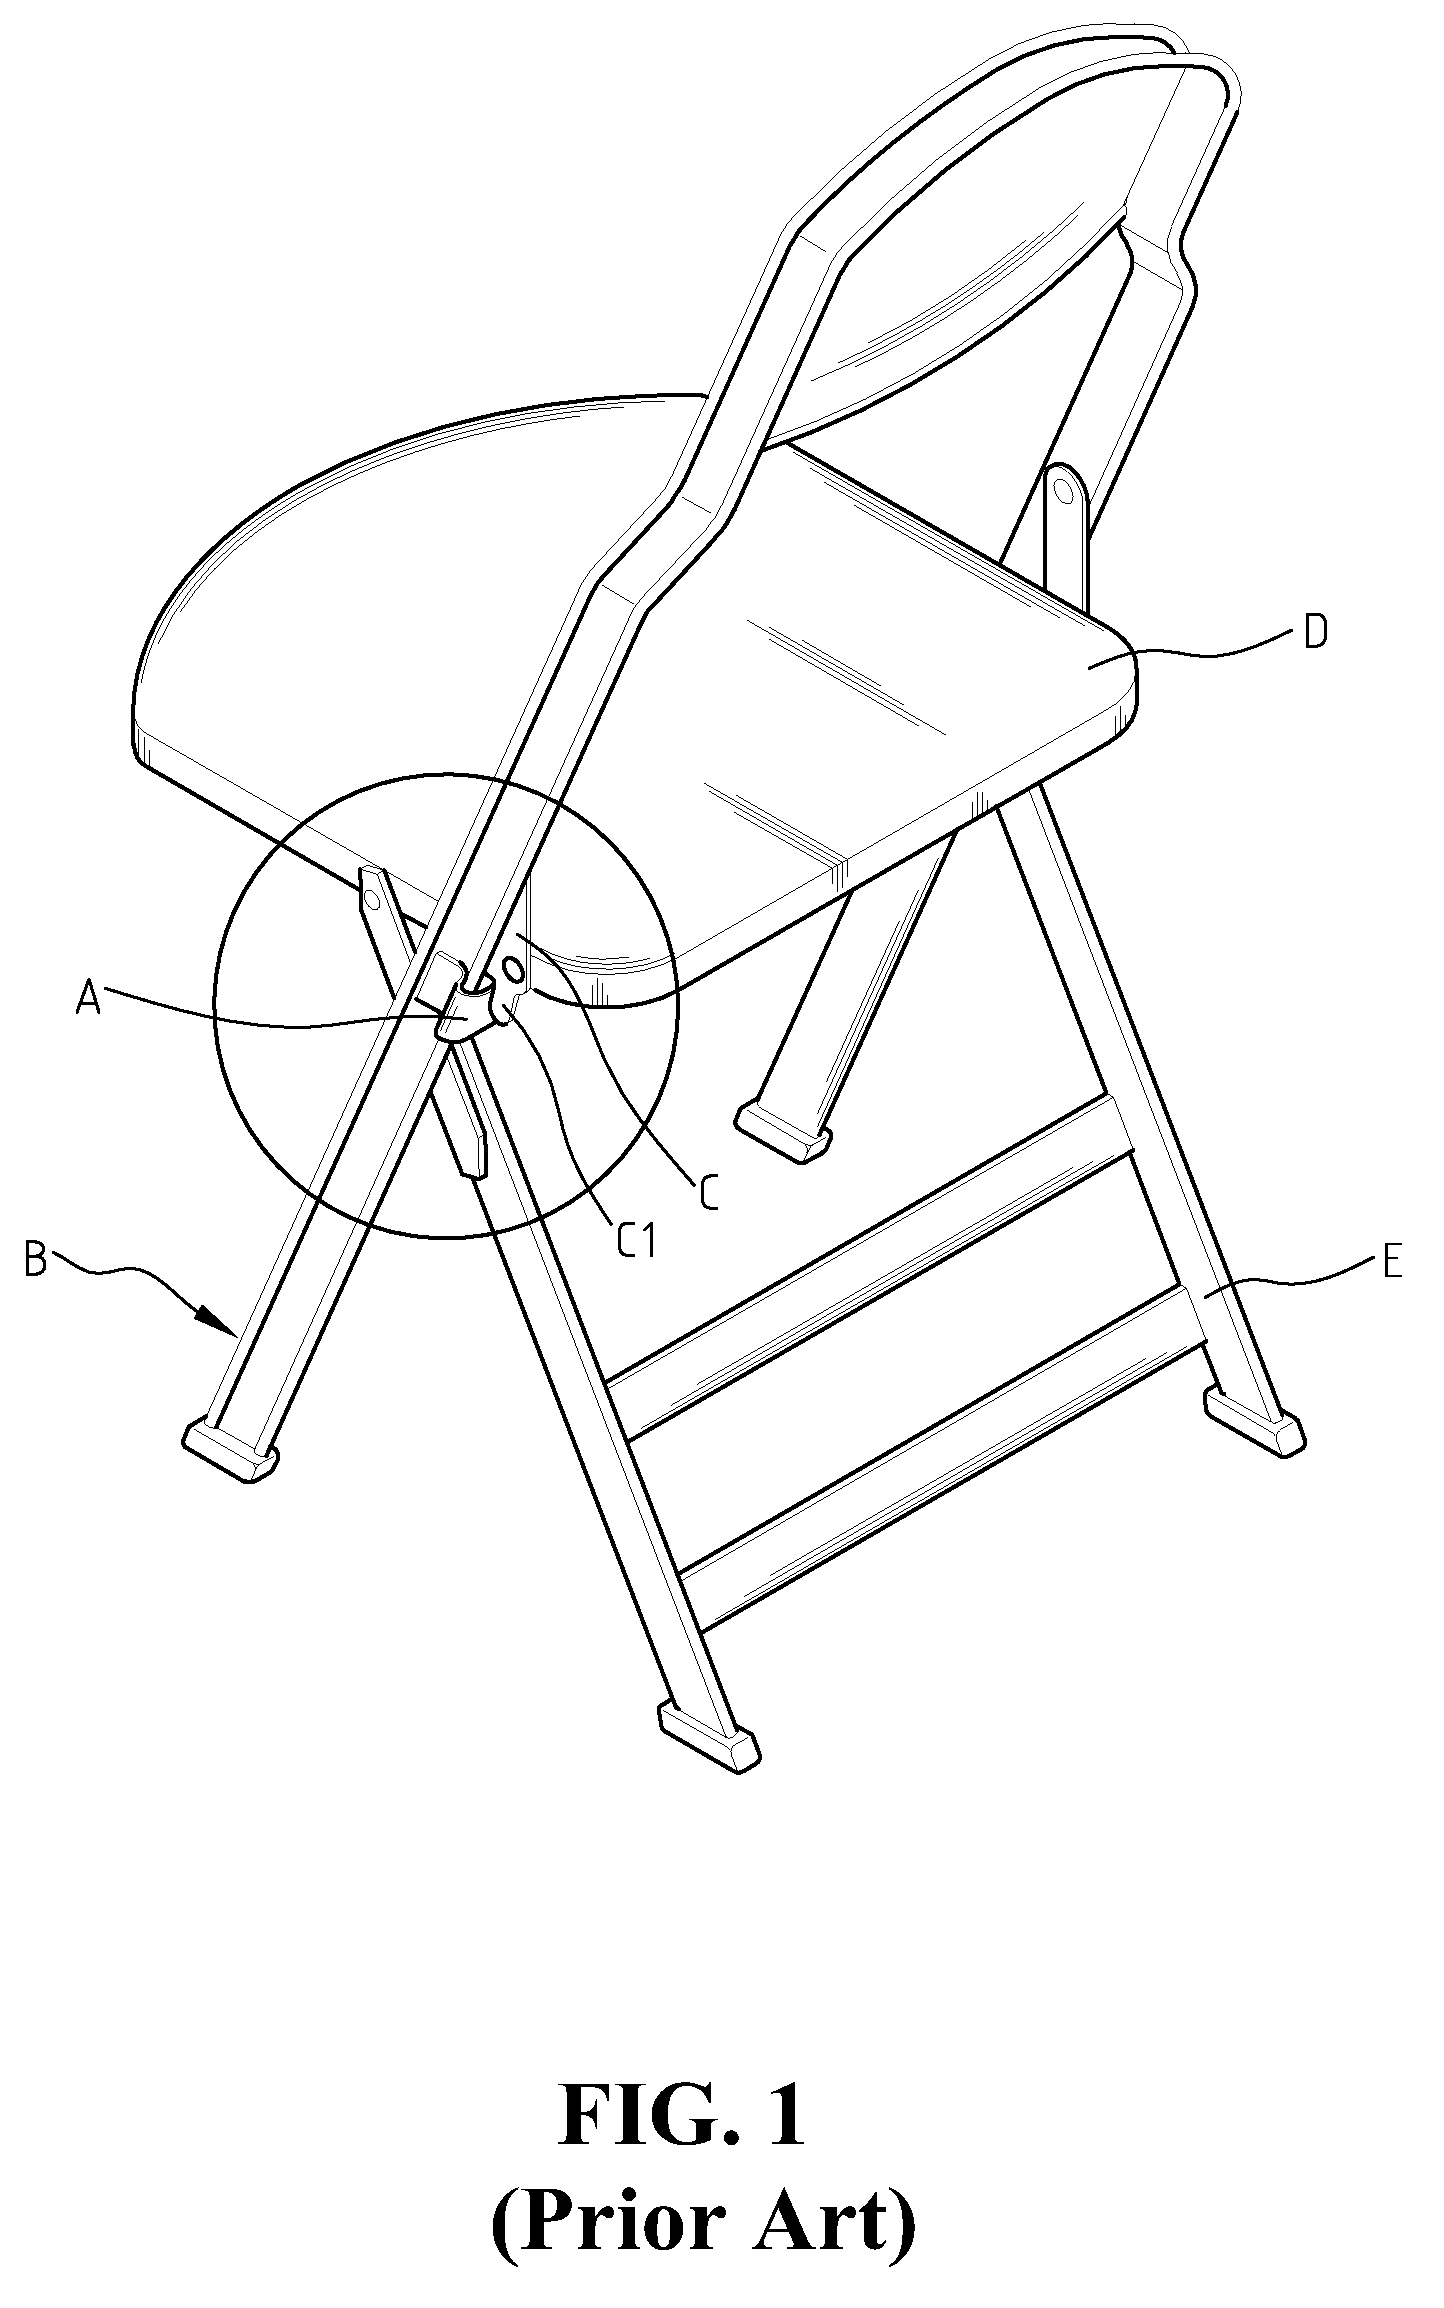 Structure for a seat supporting frame of a chair